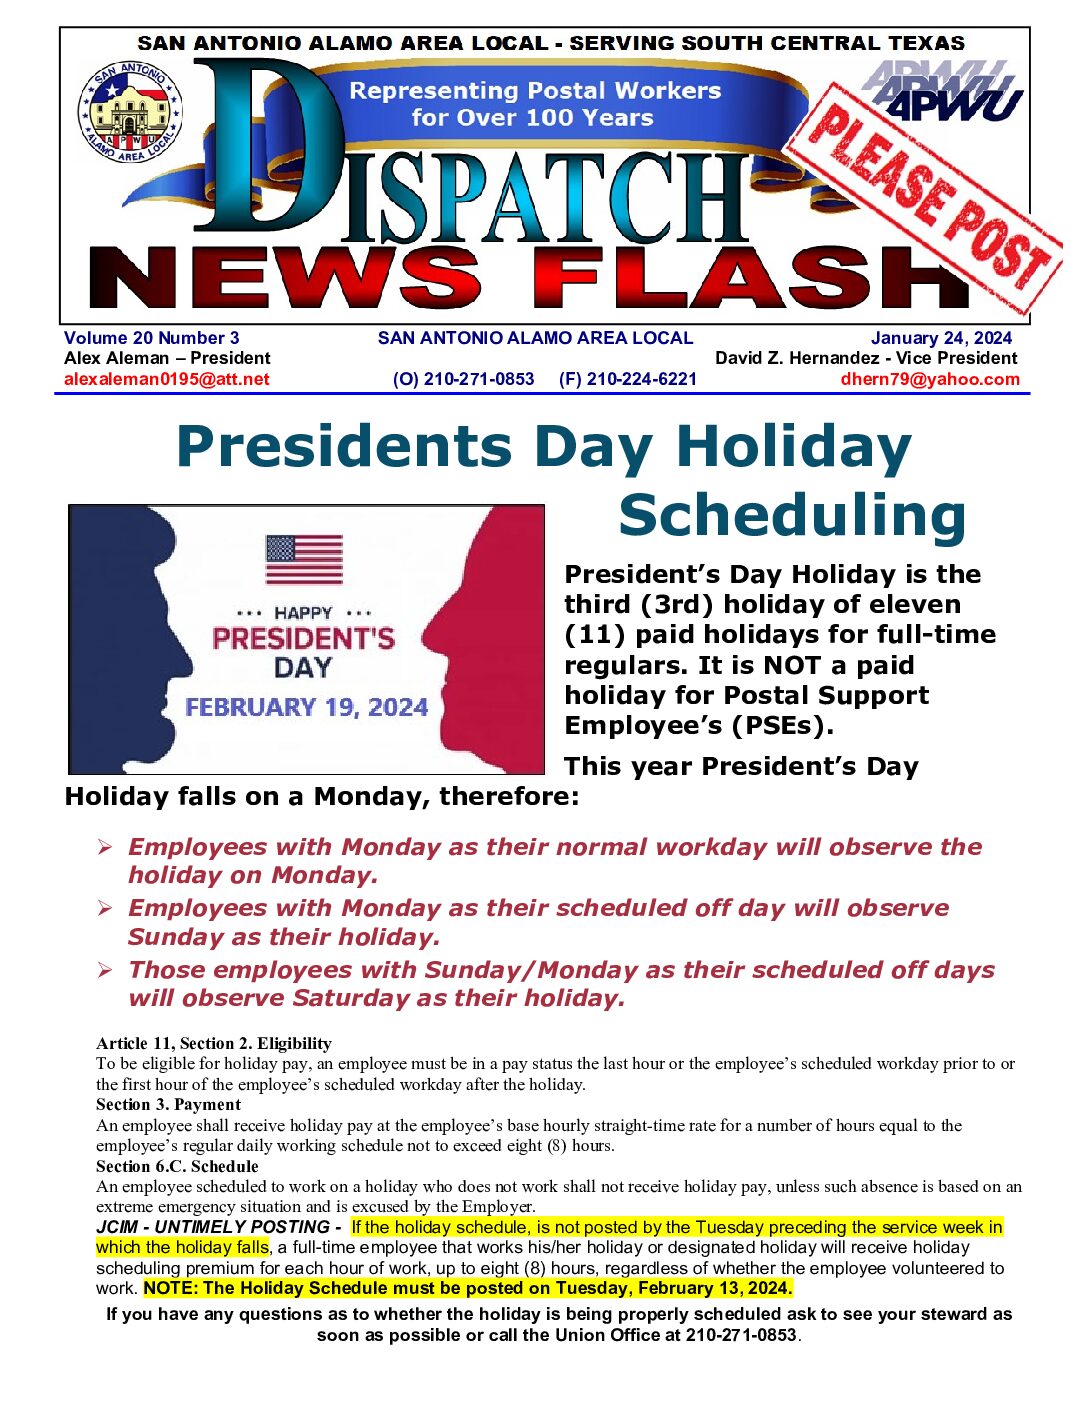 NewsFlash 20-3 President’s Day Holiday Scheduling - 